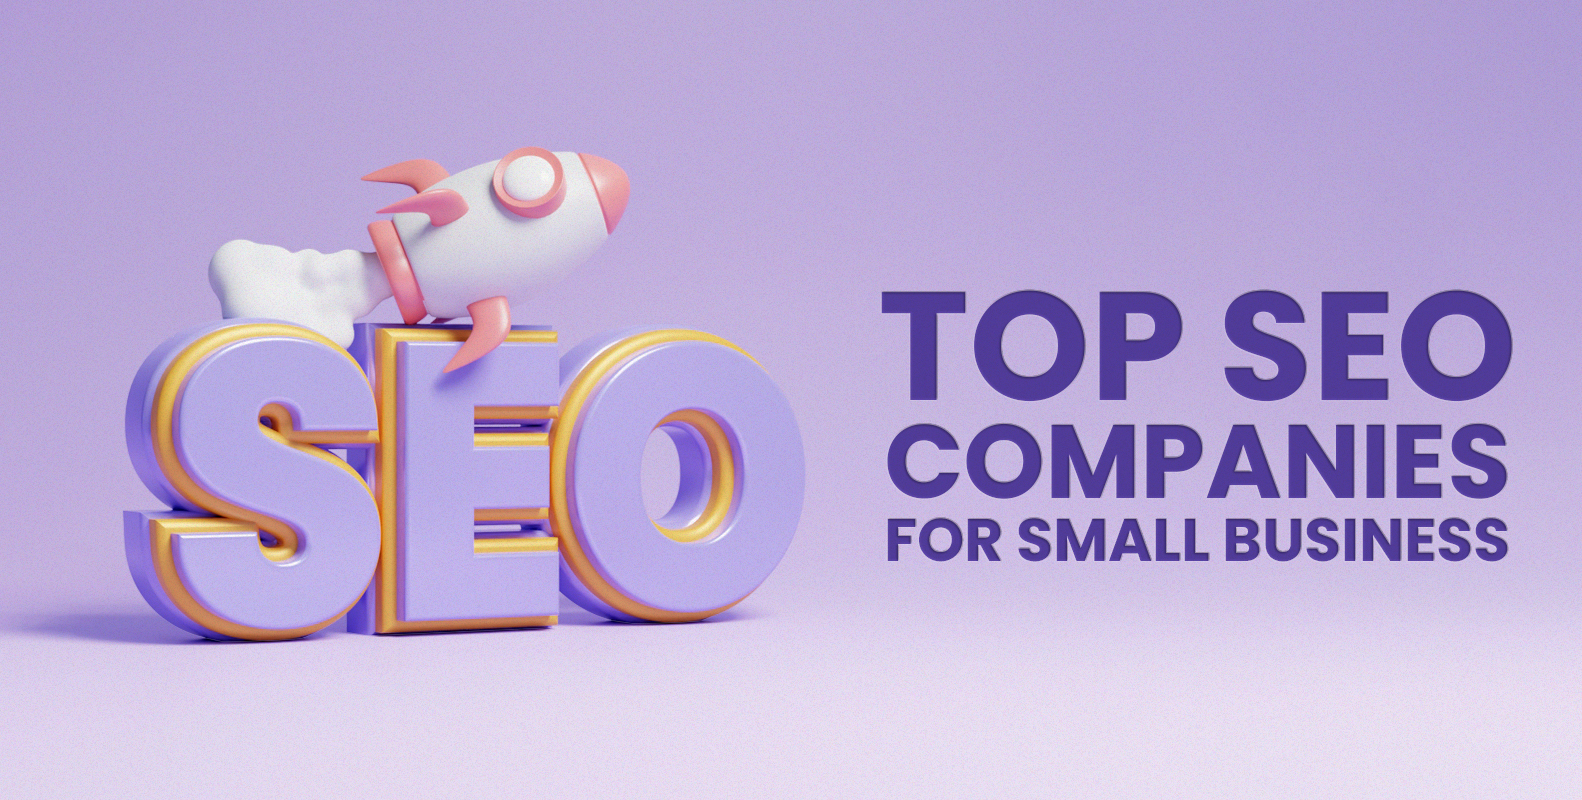 Top SEO companies for small business